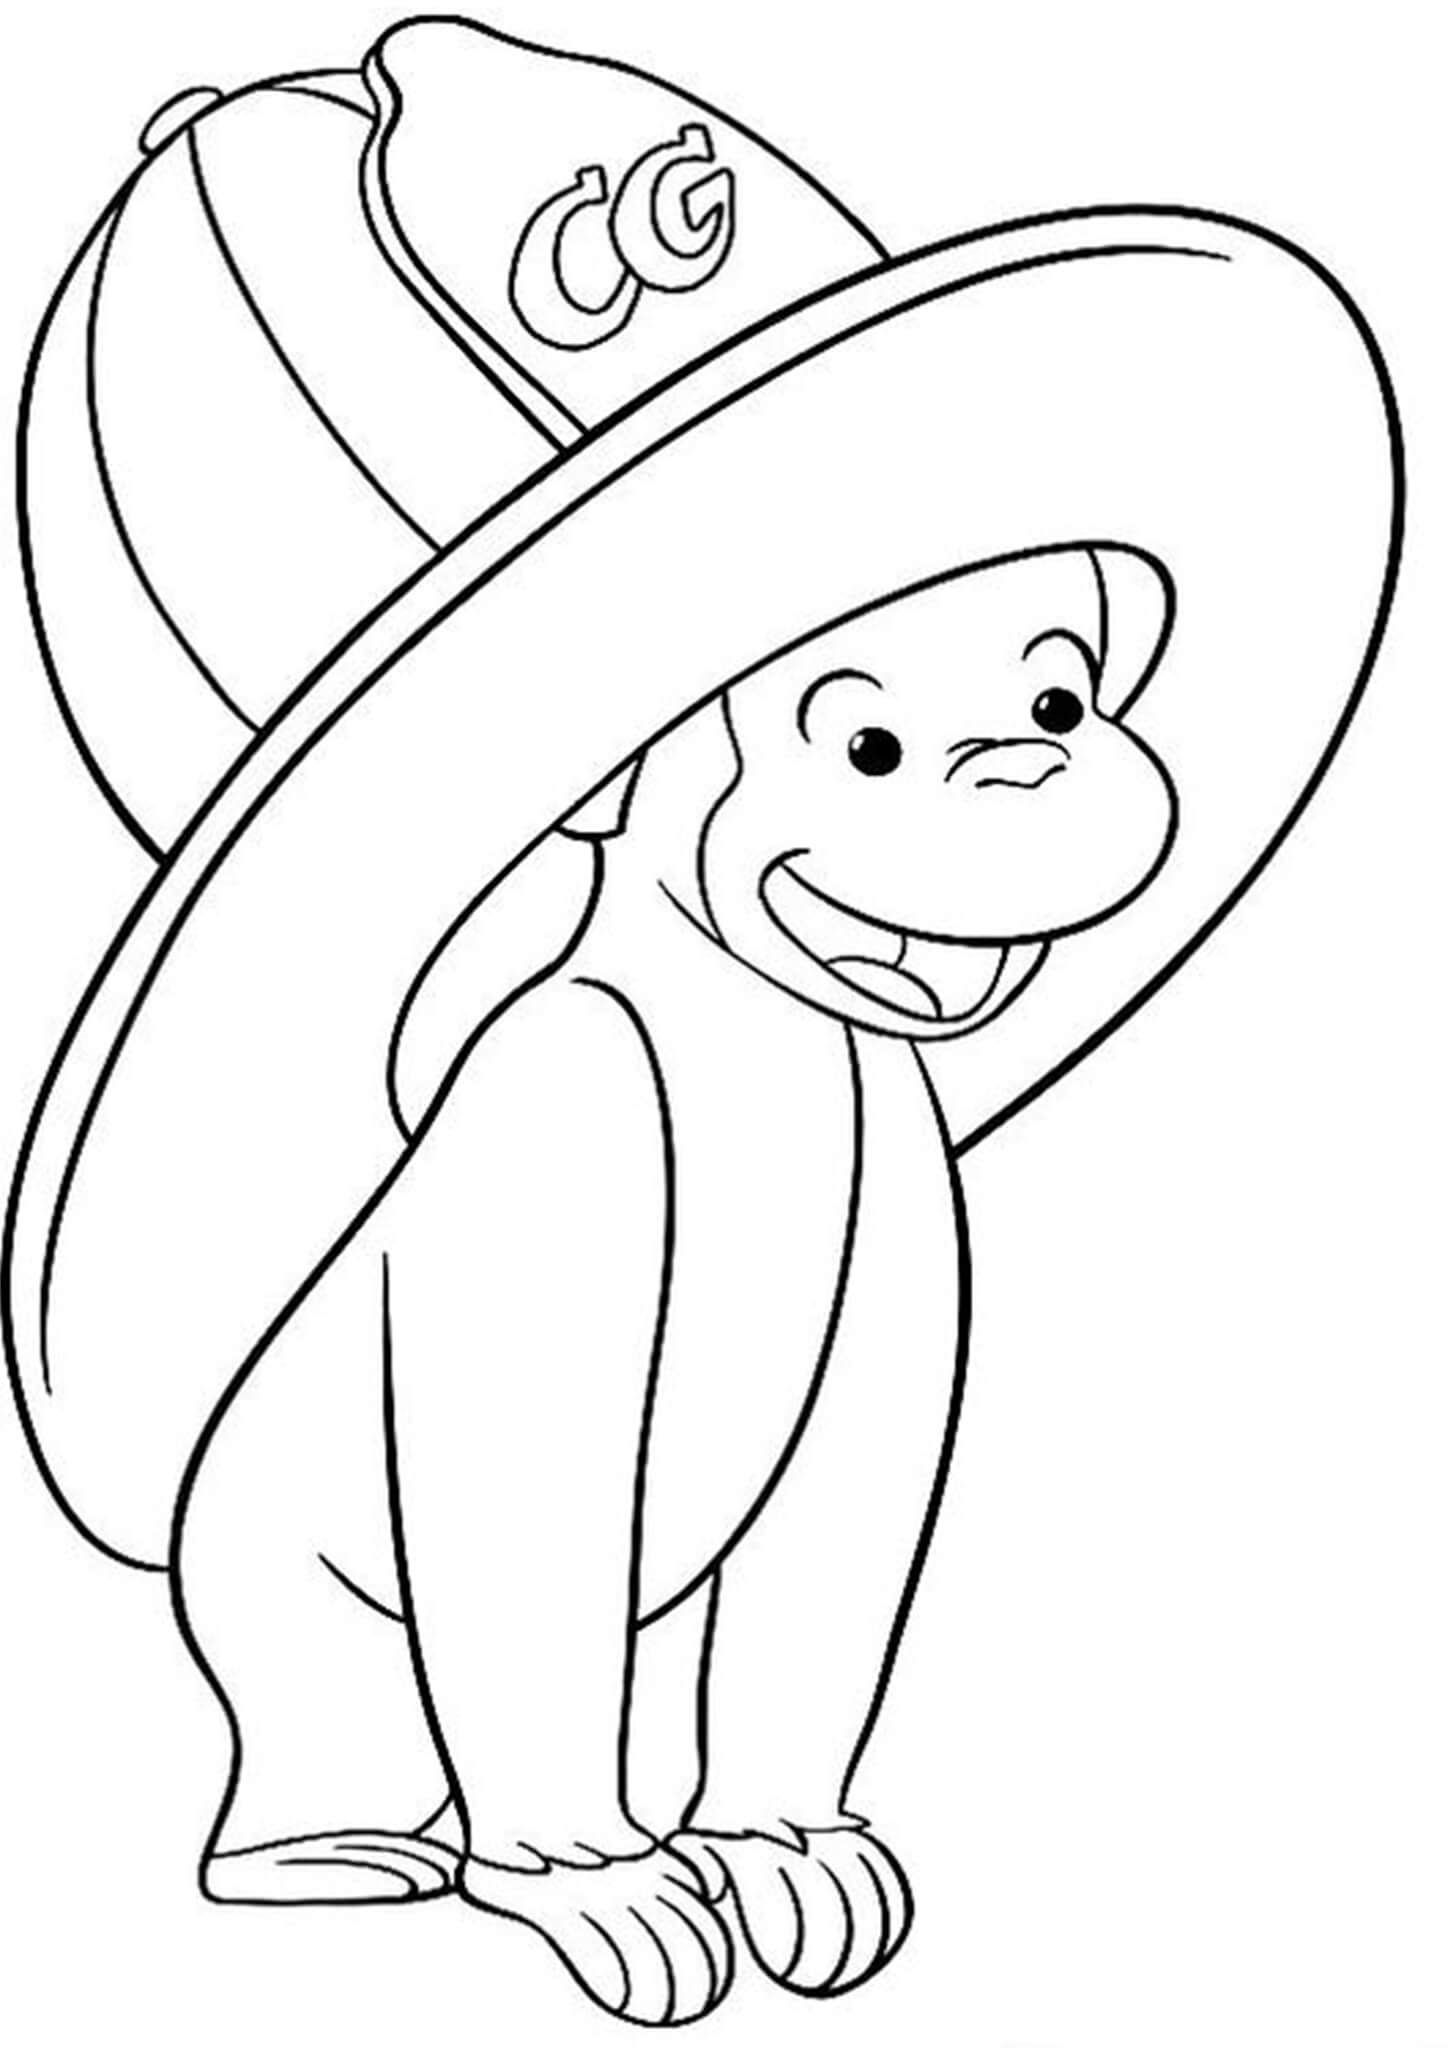 Free & Easy To Print Curious George Coloring Pages | Curious george  coloring pages, Fall coloring pages, Cartoon coloring pages